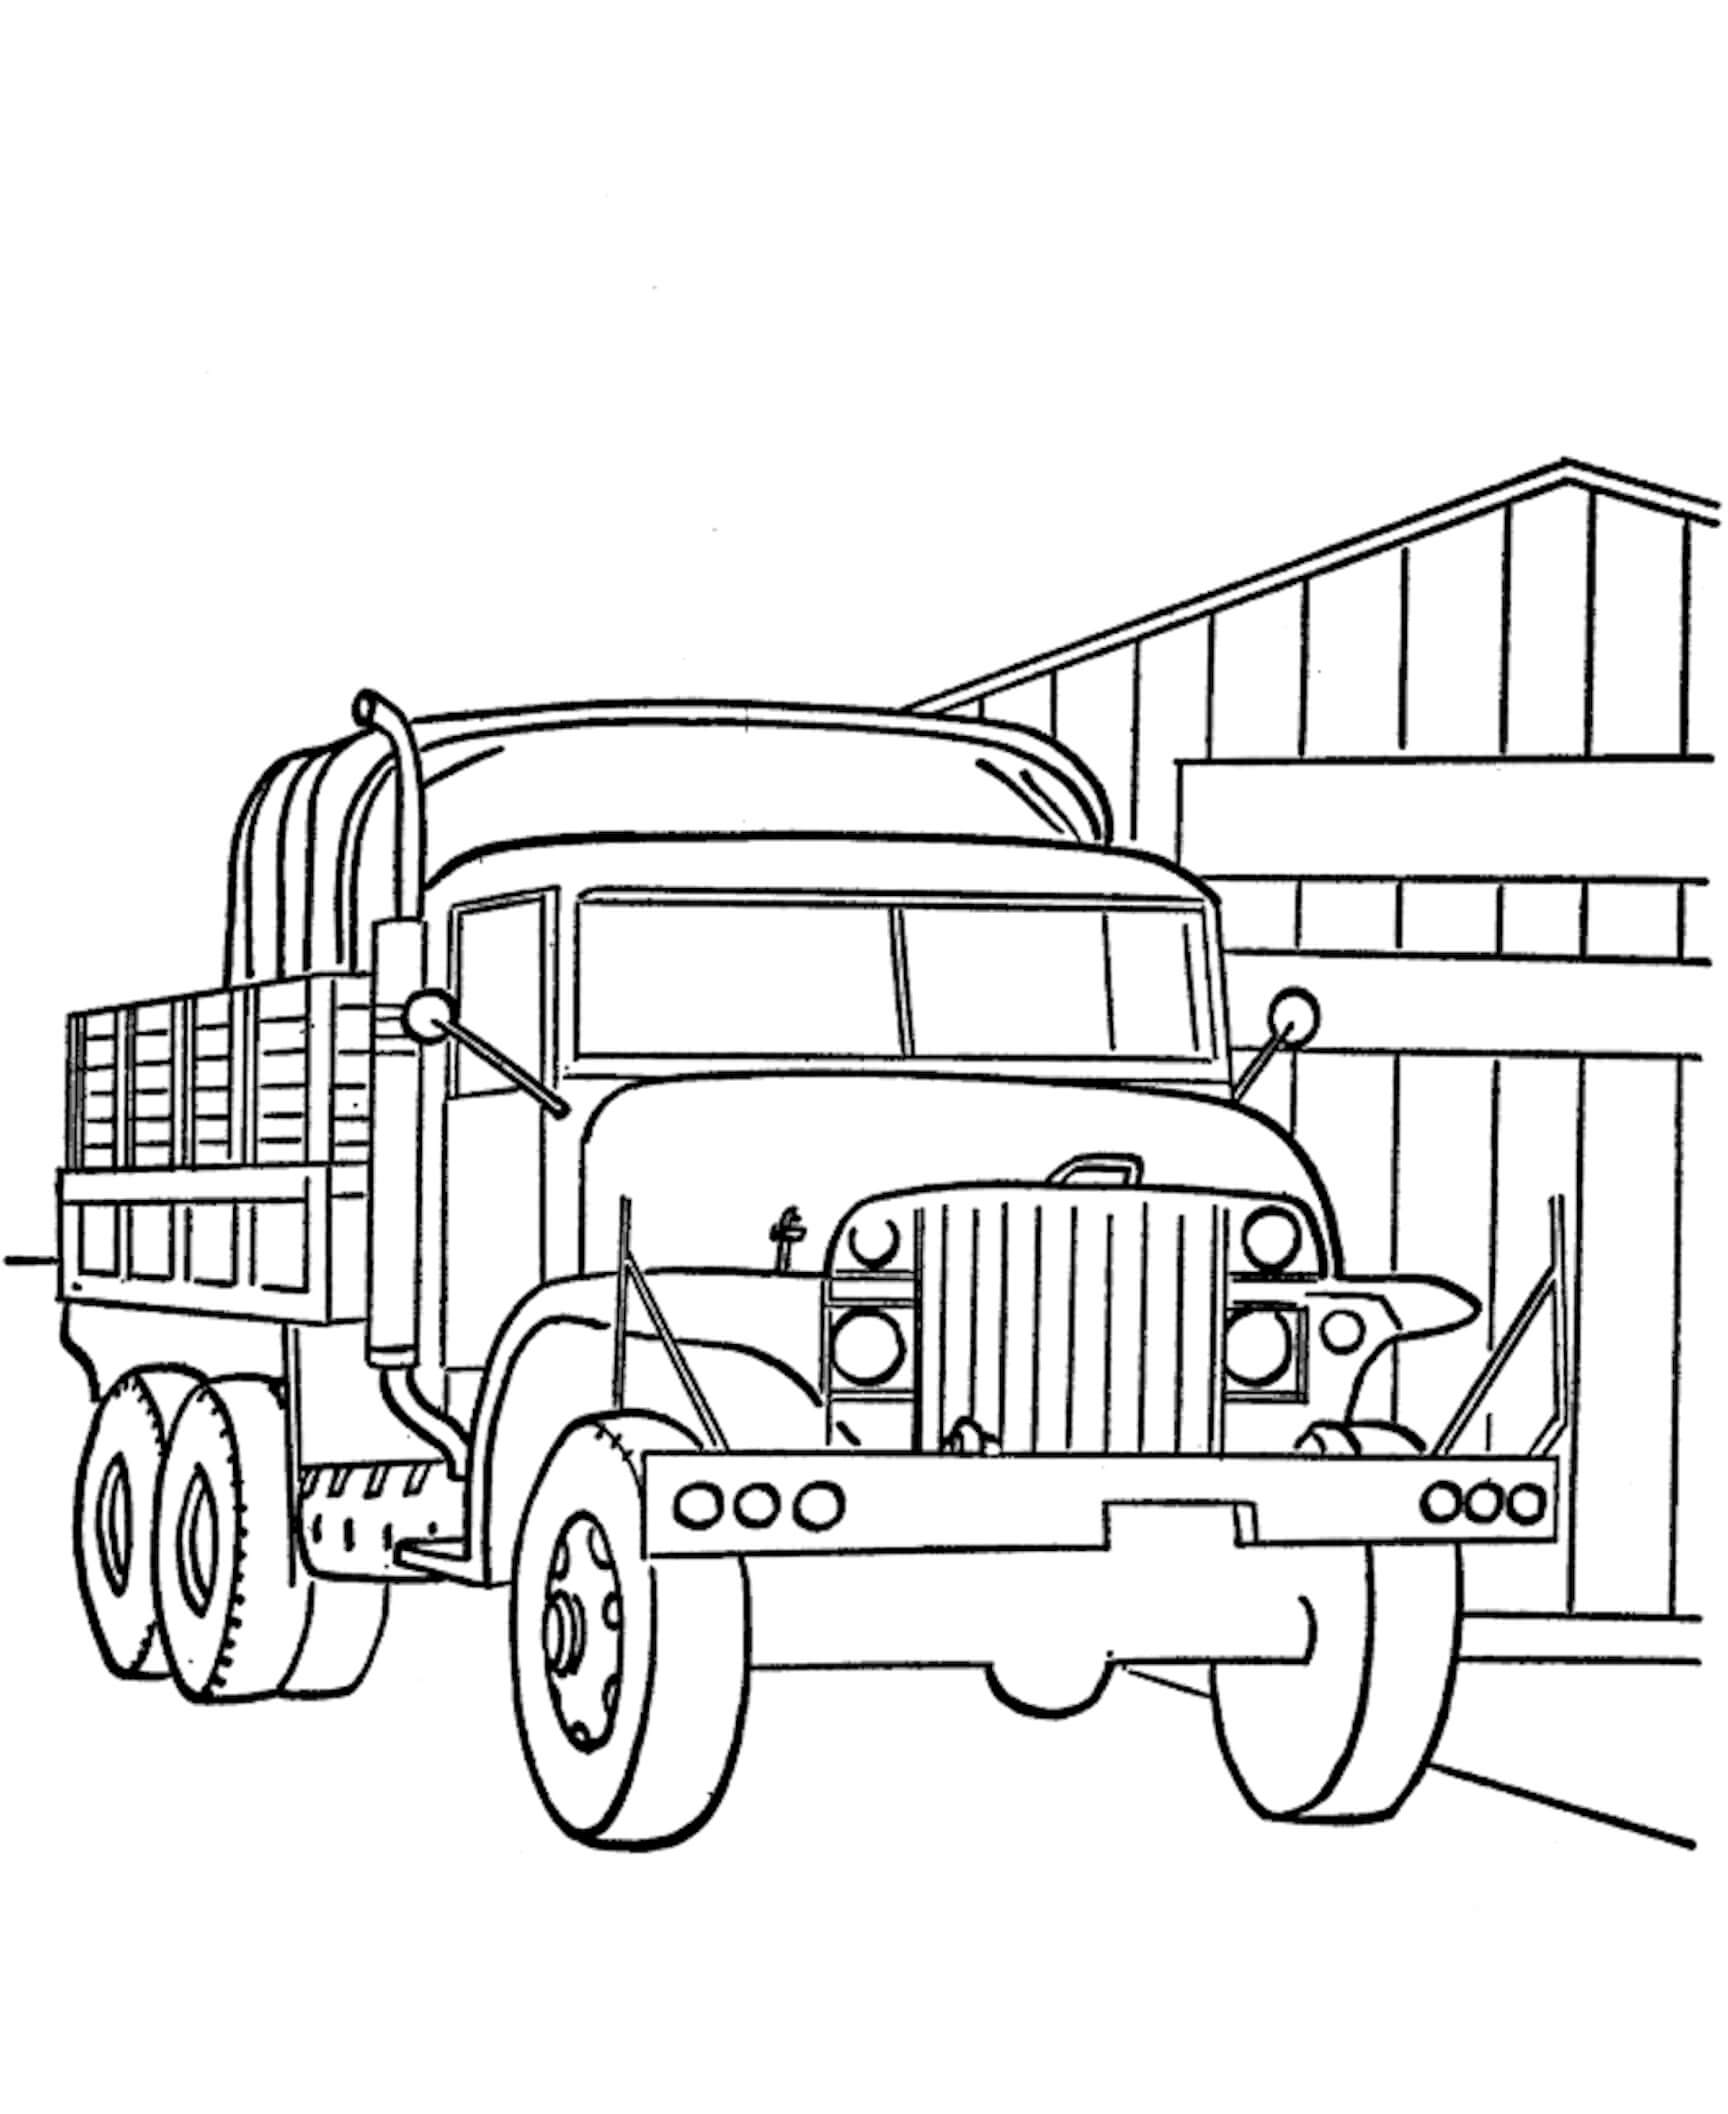 Big truck coloring page